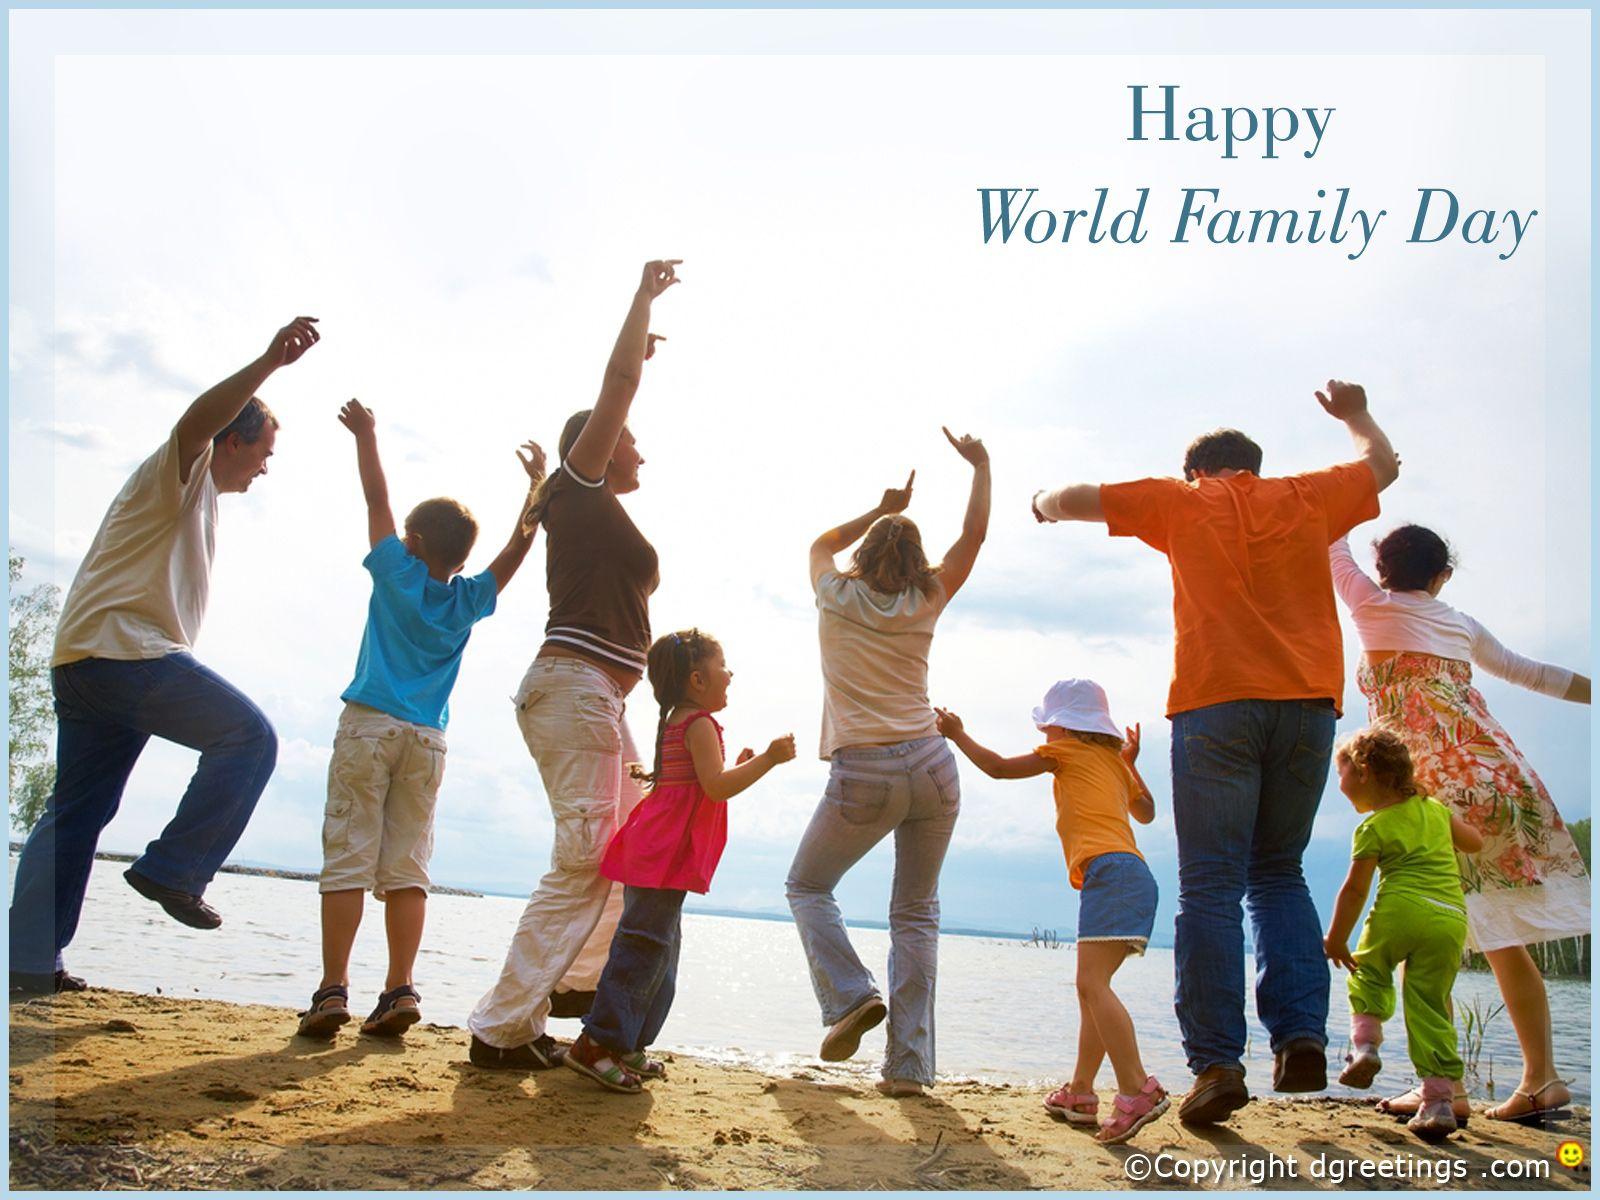 Family Day wallpaper of different sizes, dgreetings.com